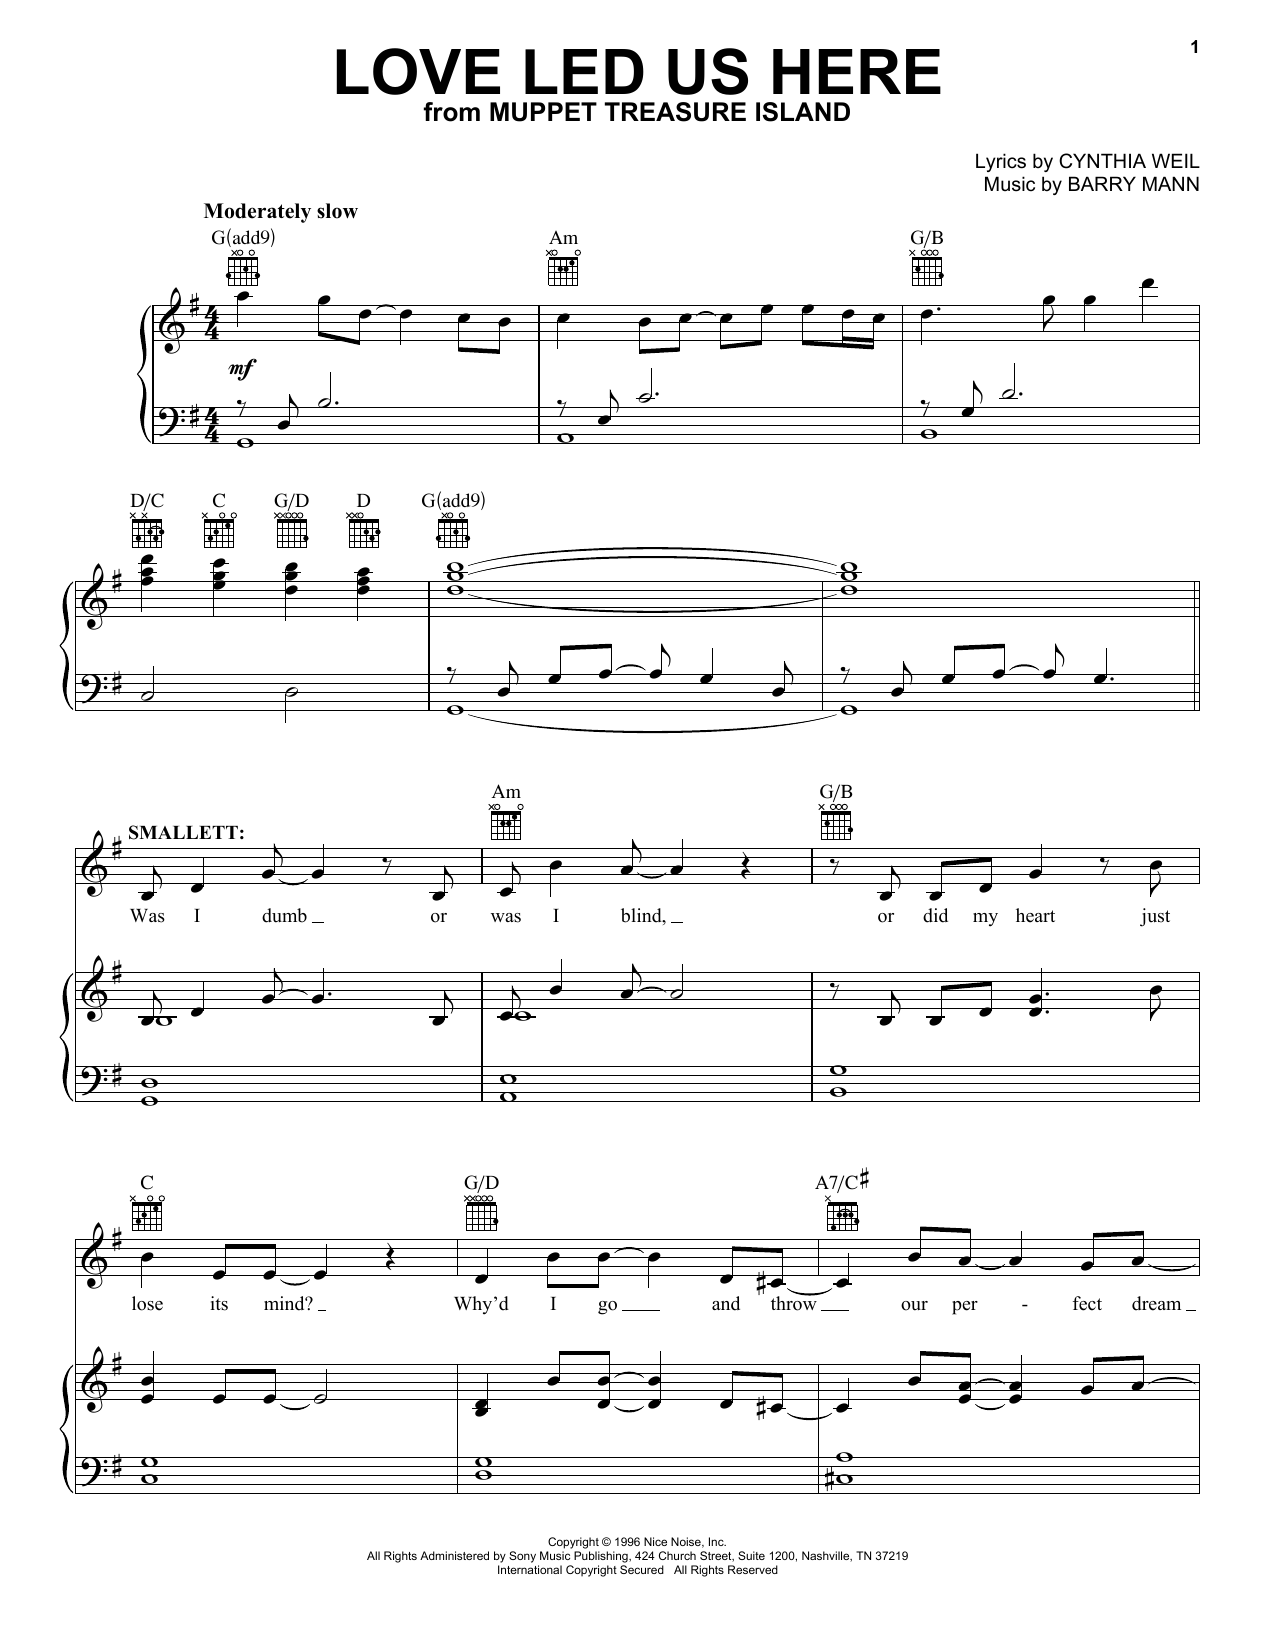 Cynthia Weil Love Led Us Here (from Muppet Treasure Island) sheet music notes printable PDF score